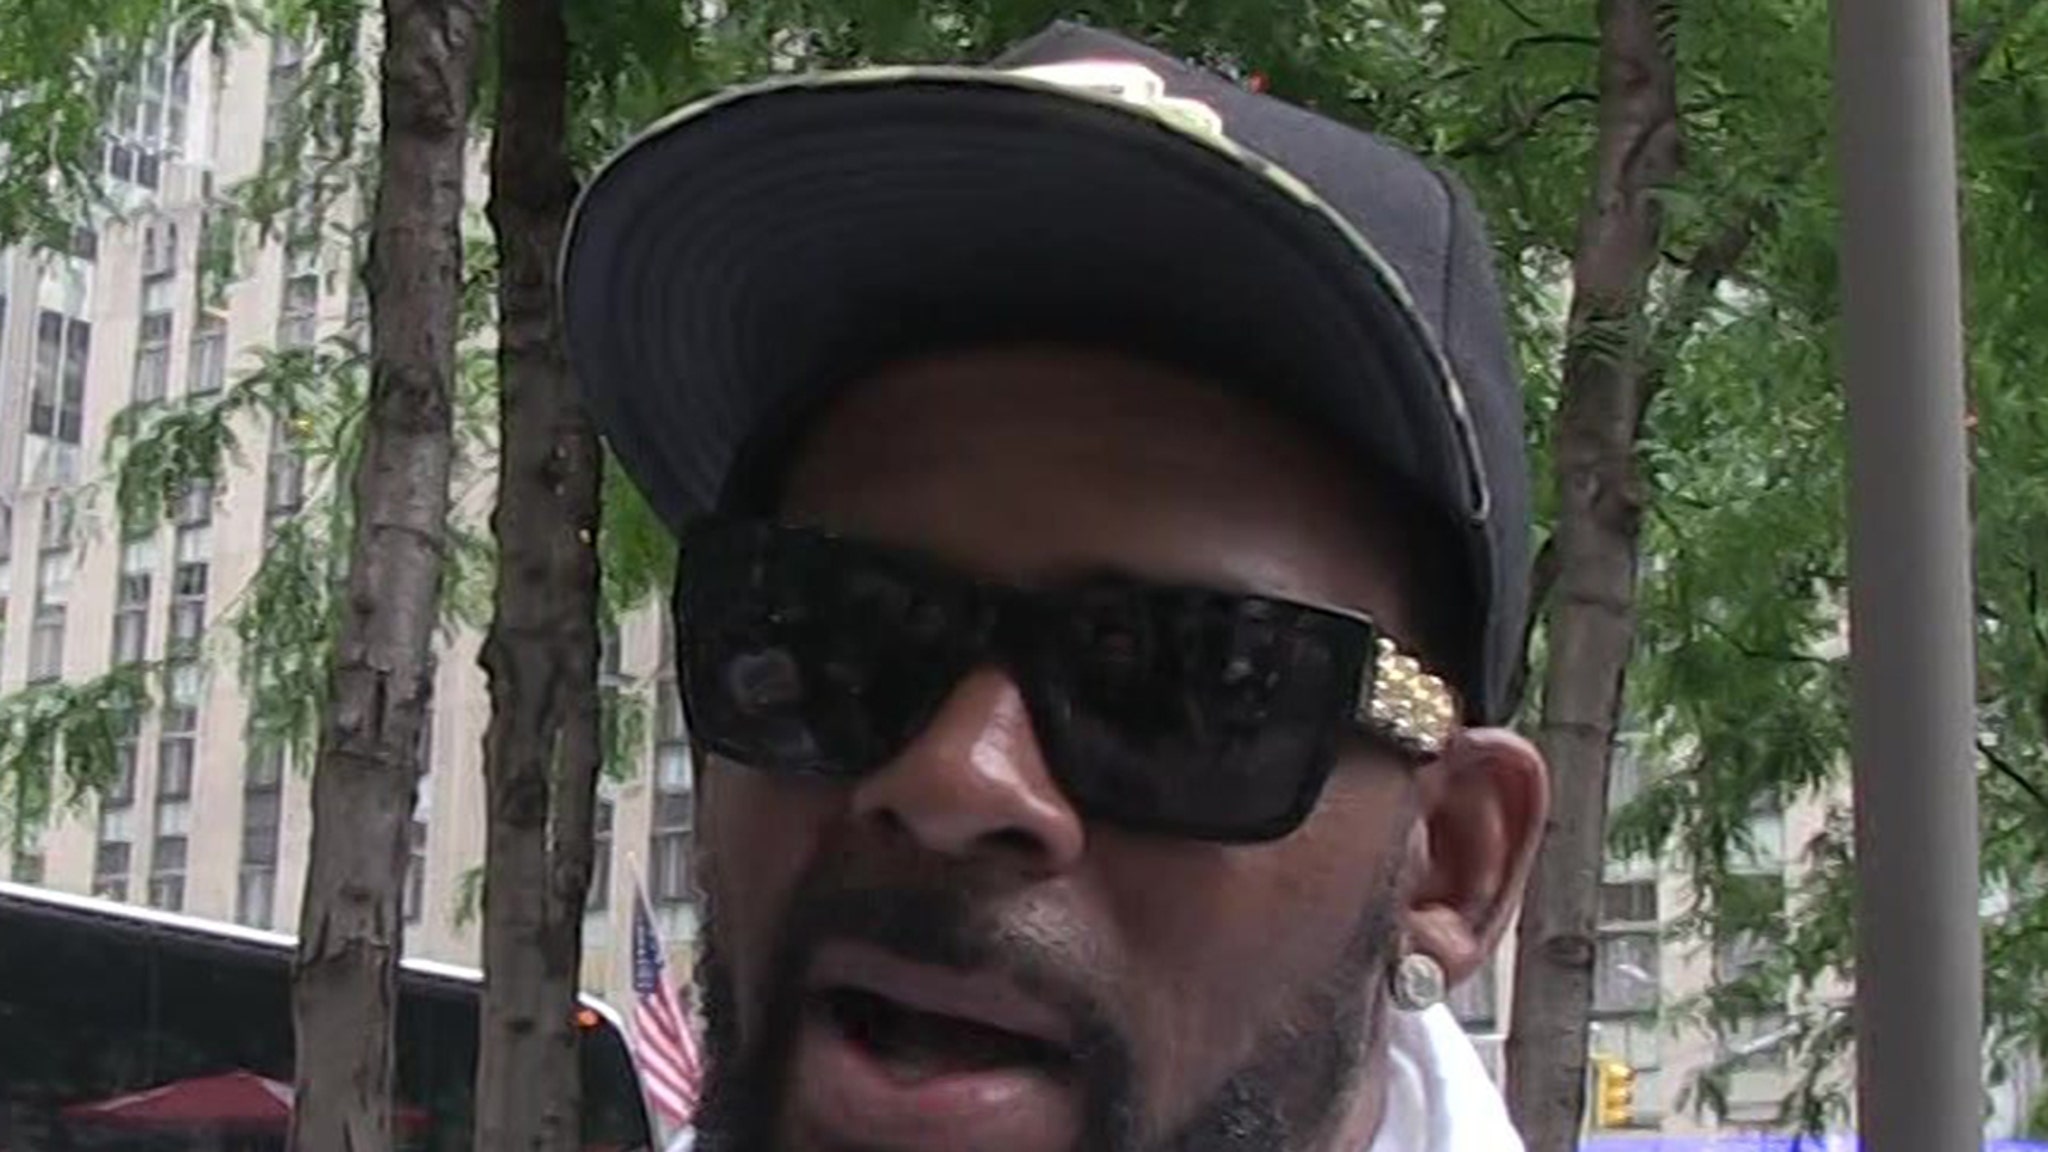 R. Kelly Removed From Suicide Watch After Legal Drama With Feds - TMZ : R. Kelly just won a mini legal battle against the feds, who just did an about-face and took the disgraced singer off suicide after he filed a lawsuit against the prison, TMZ has learned.  | Tranquility 國際社群